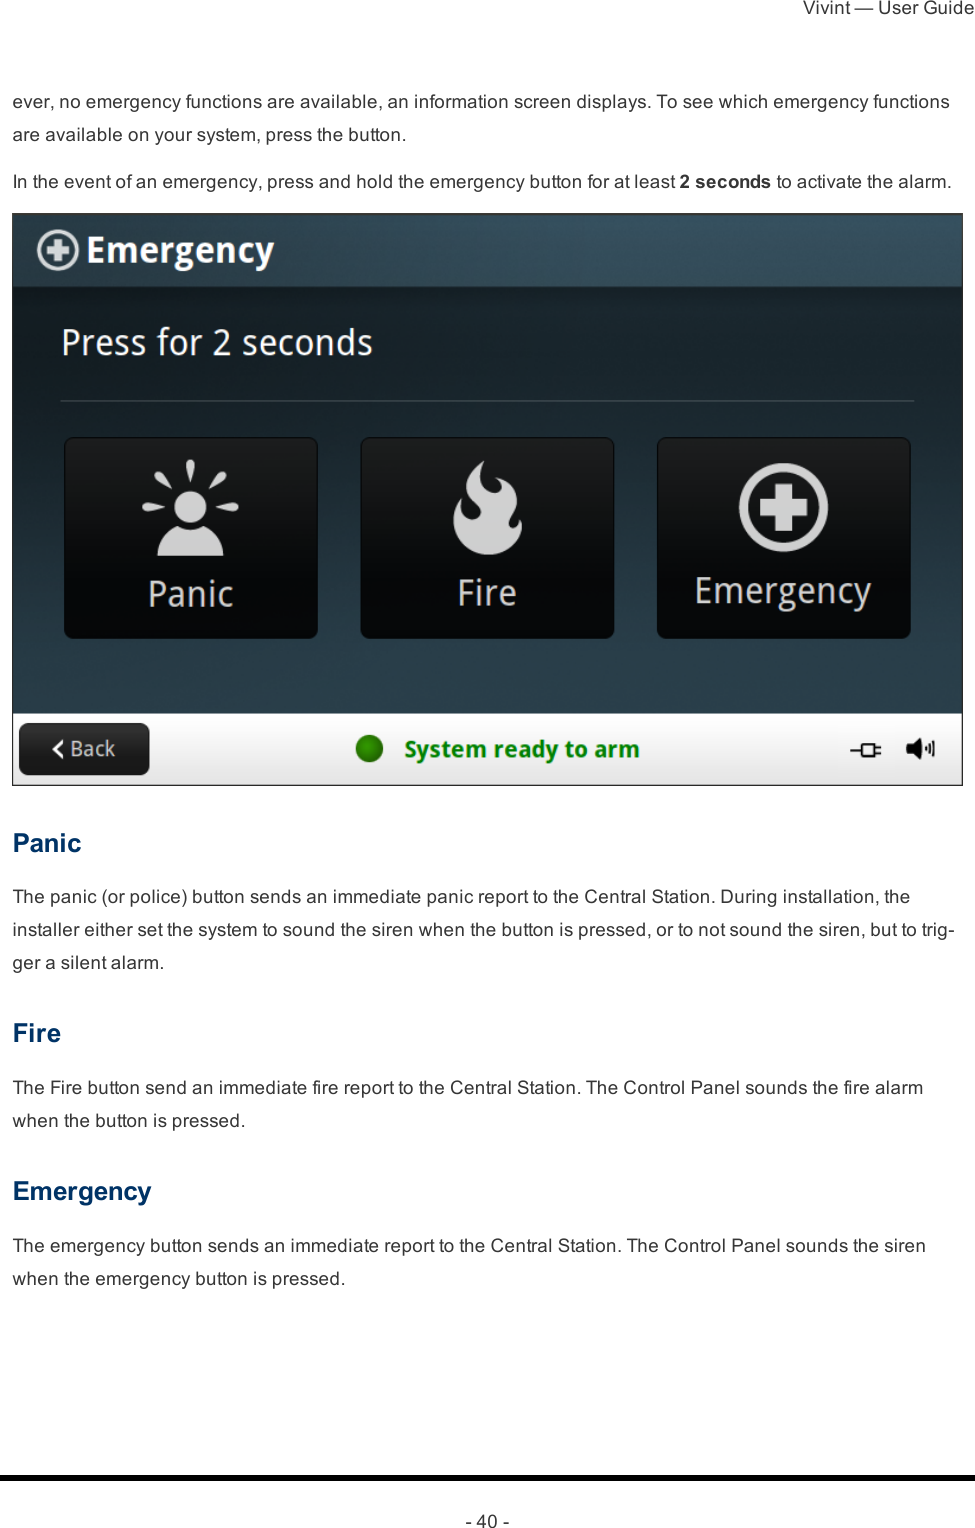 Vivint — User Guide- 40 -ever, no emergency functions are available, an information screen displays. To see which emergency functions are available on your system, press the button.In the event of an emergency, press and hold the emergency button for at least 2 seconds to activate the alarm.PanicThe panic (or police) button sends an immediate panic report to the Central Station. During installation, the installer either set the system to sound the siren when the button is pressed, or to not sound the siren, but to trig-ger a silent alarm.FireThe Fire button send an immediate fire report to the Central Station. The Control Panel sounds the fire alarm when the button is pressed.EmergencyThe emergency button sends an immediate report to the Central Station. The Control Panel sounds the siren when the emergency button is pressed. 